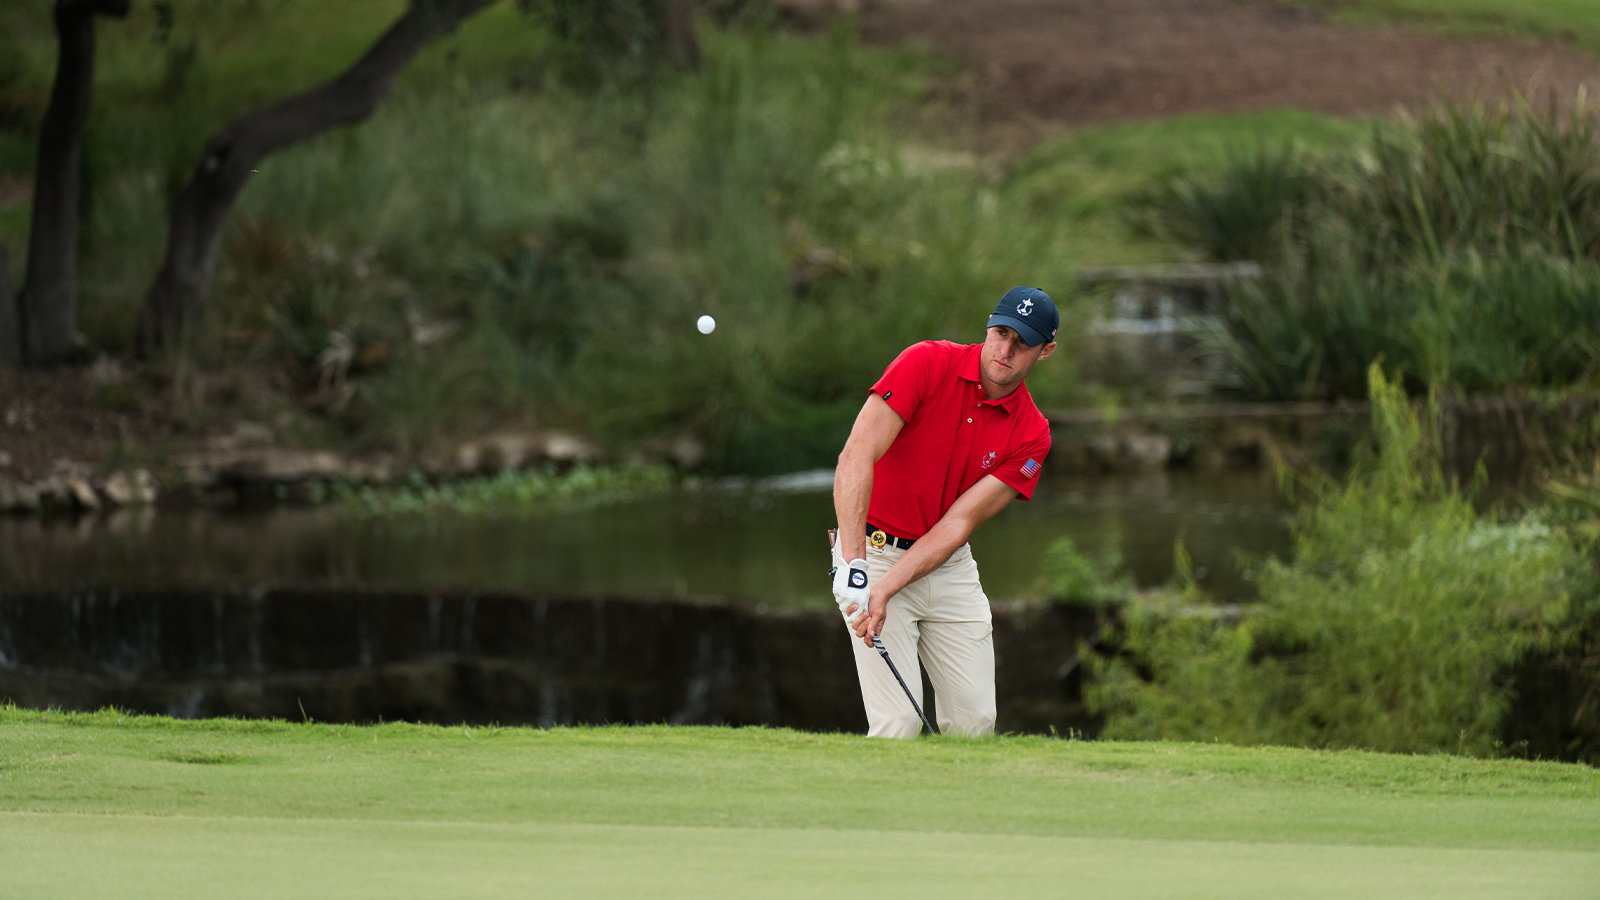 Alex Beach of the United States chips onto the eighth green during the Singles Matches for the 29th PGA Cup held at the Omni Barton Creek Resort & Spa on September 29, 2019 in Austin, Texas. (Photo by Montana Pritchard/PGA of America)